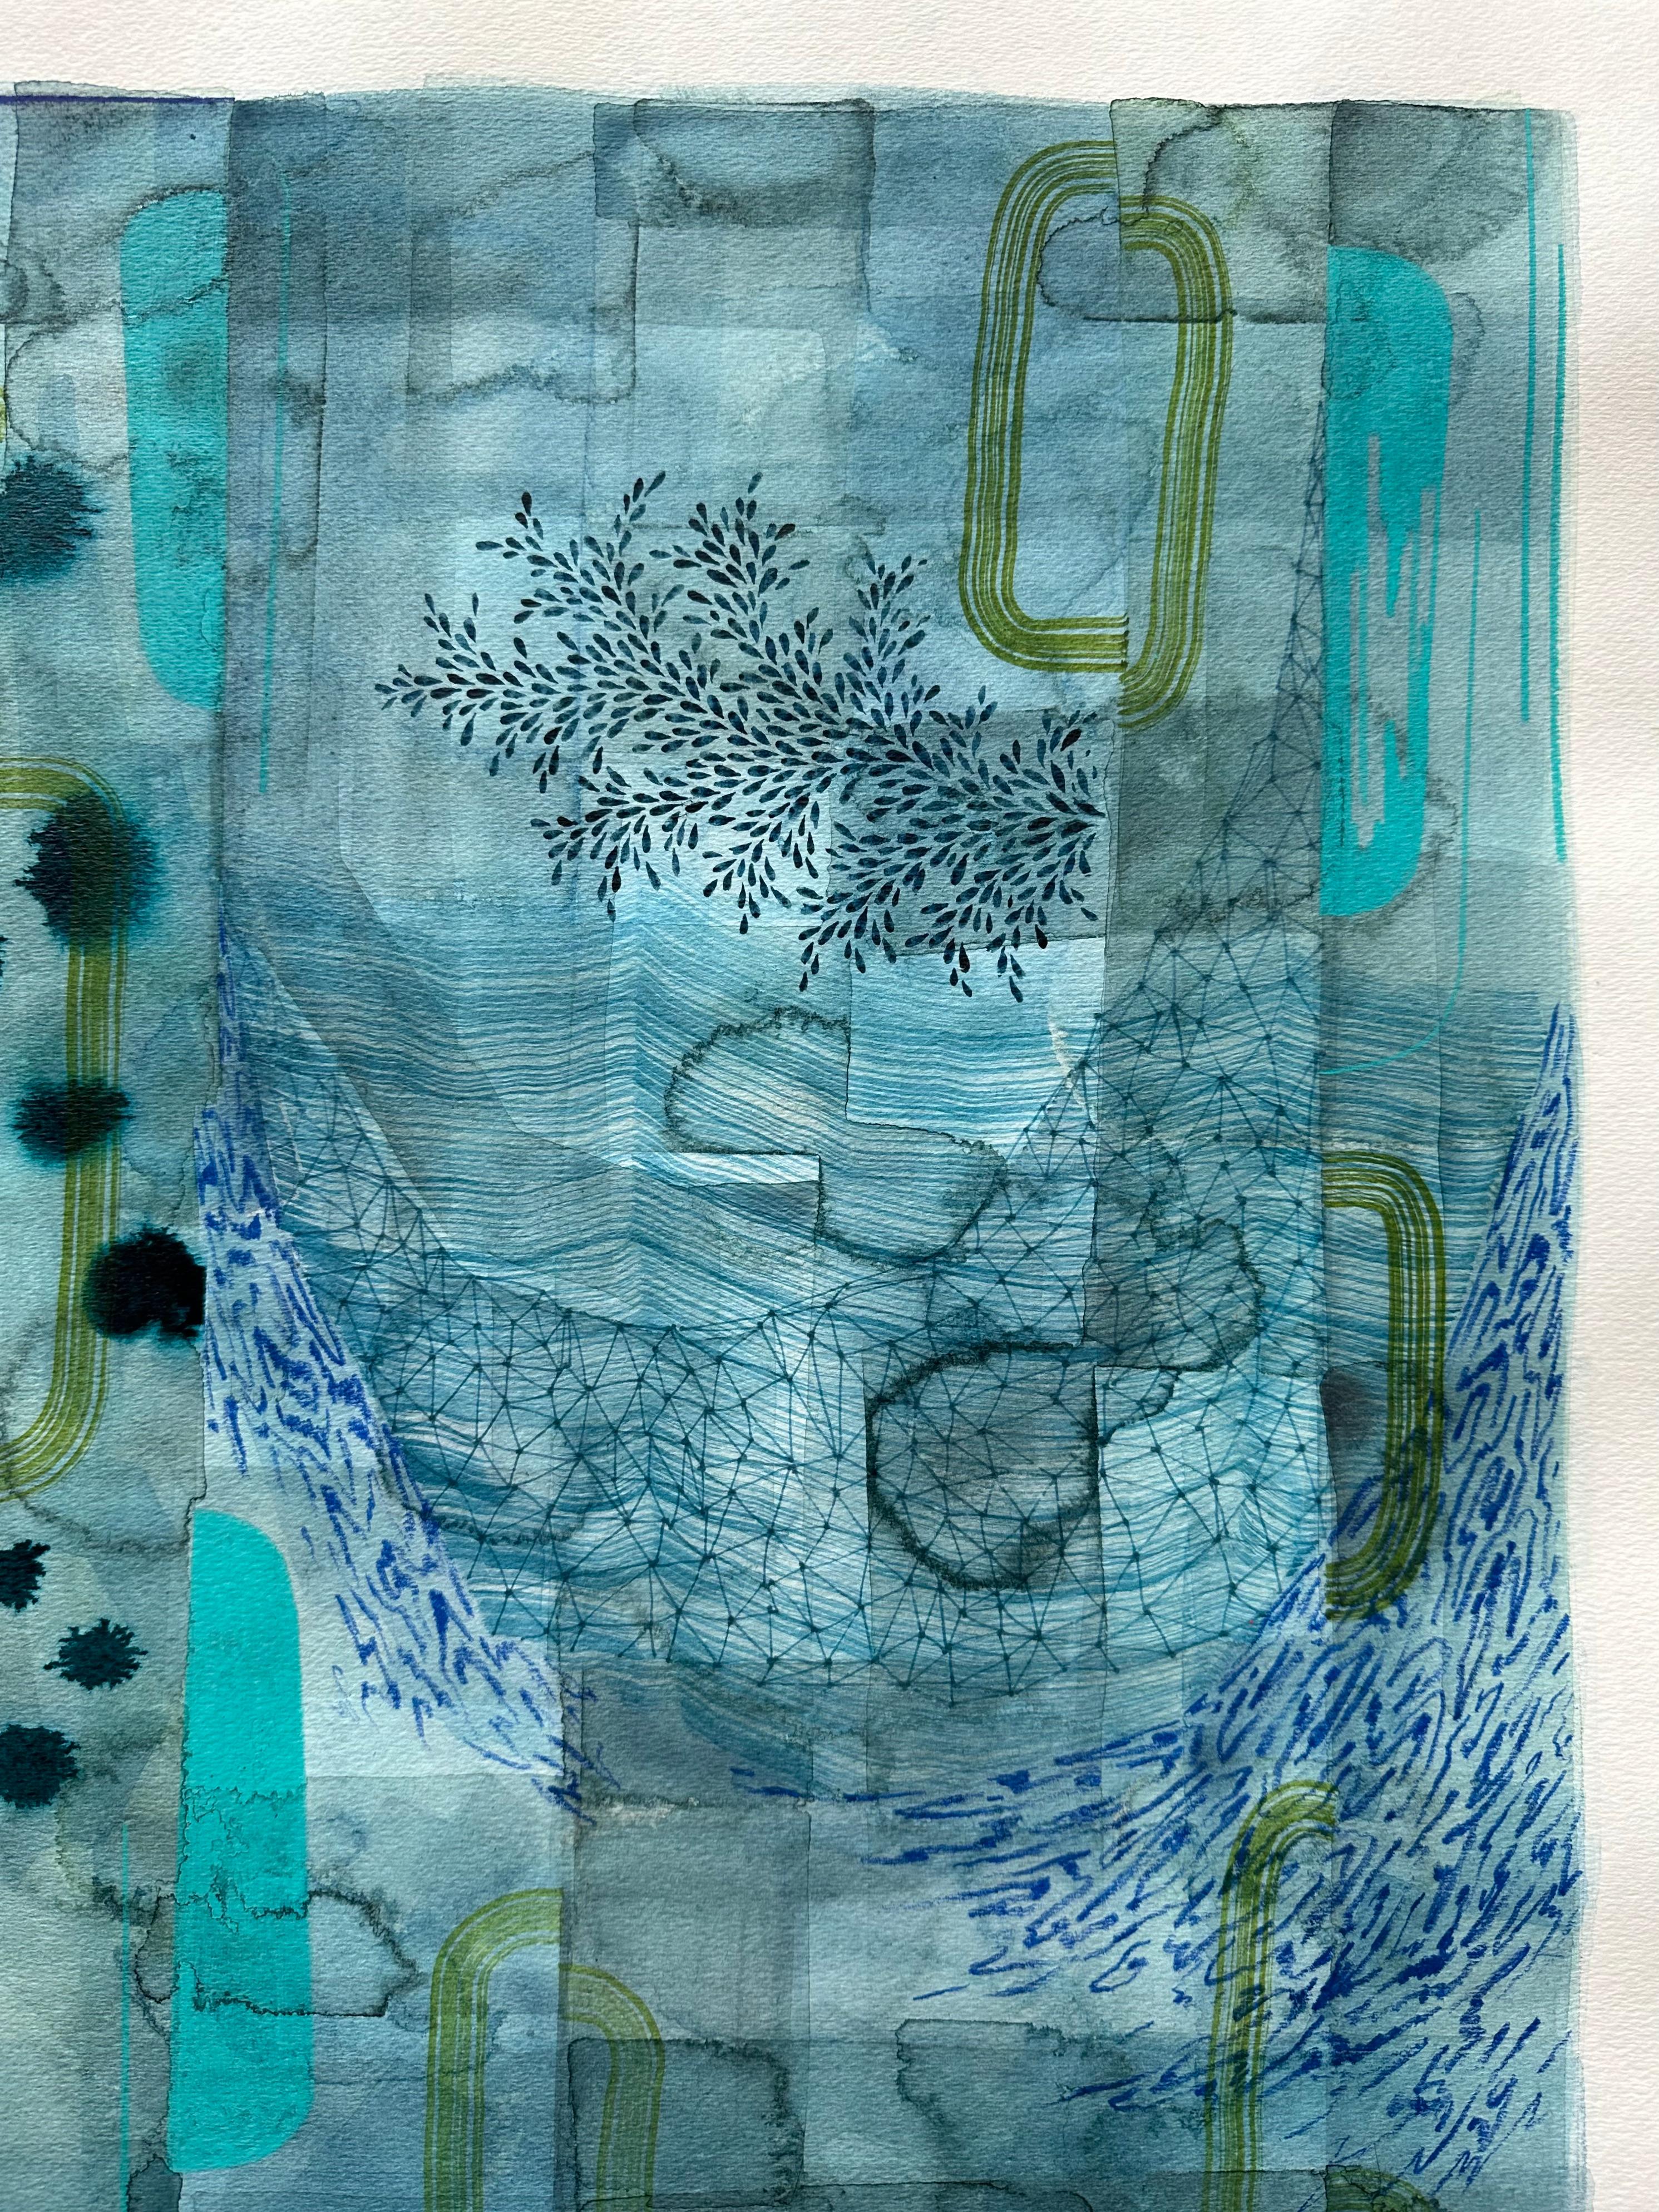 Carefully ordered patterns, geometric shapes and delicate lines in indigo, bright blue and olive green complement a teal grayish blue background. Signed on verso.

Exploring a world beyond tangible reality, Brown searches for meaning in the unknown.